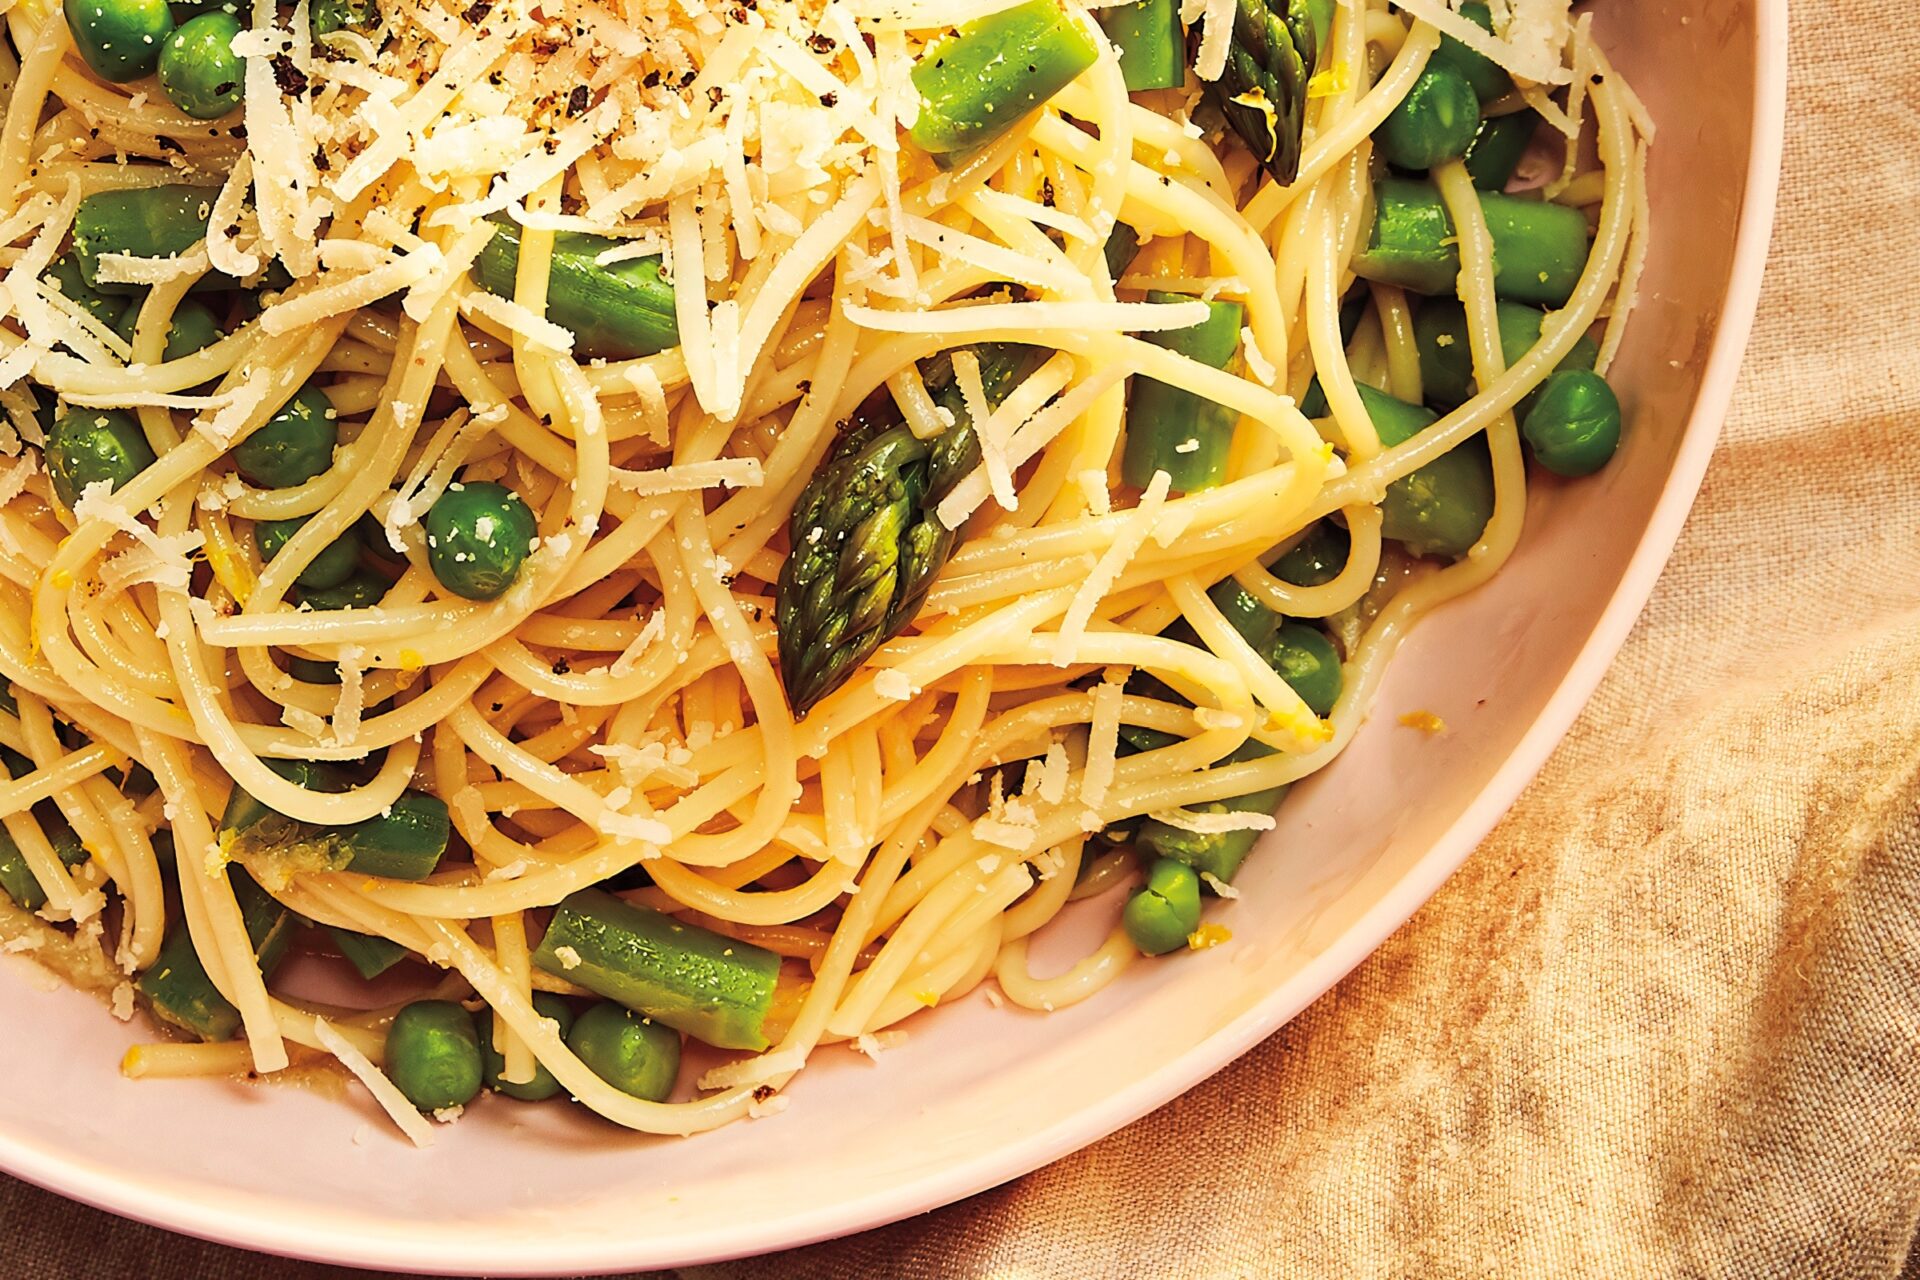 plate of spaghetti noodles with cheese, lemon, peas and asparagus